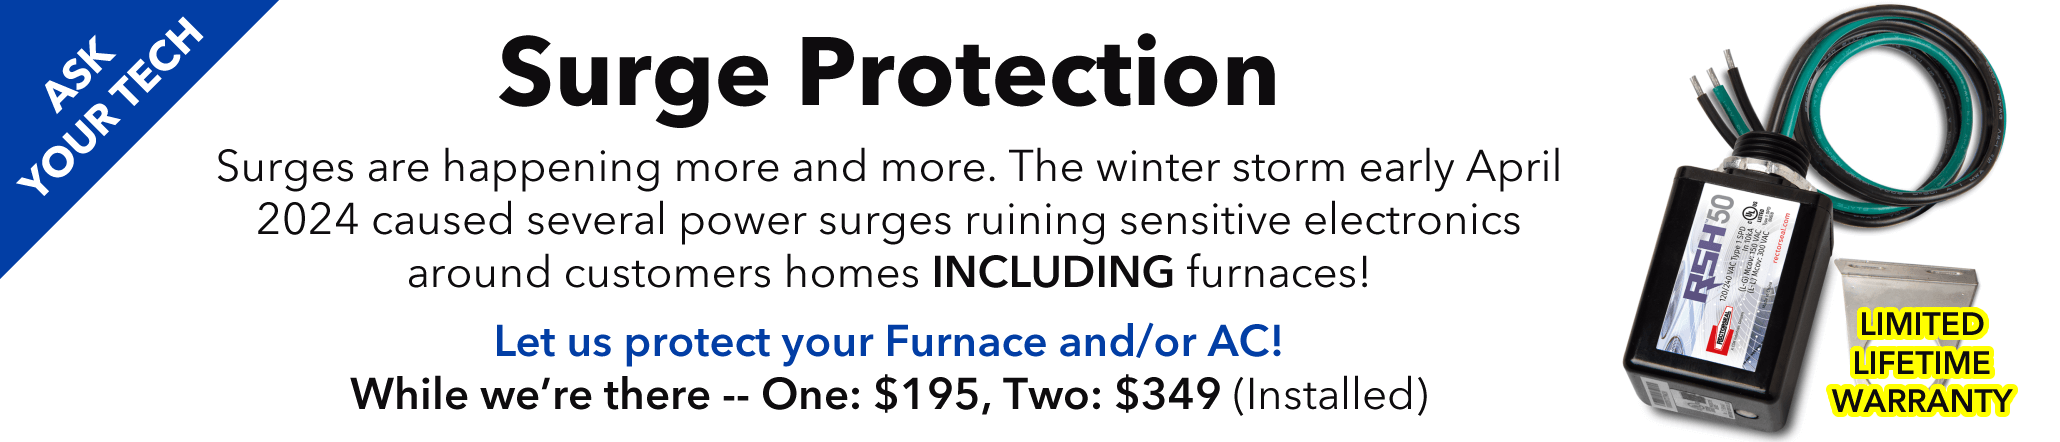 Ask your technician about Surge Protection. The winter storm we had in early April 2024 caused several surge and thousands in damage for our customers alone. Add surge protection to your Furnace and/or AC today!